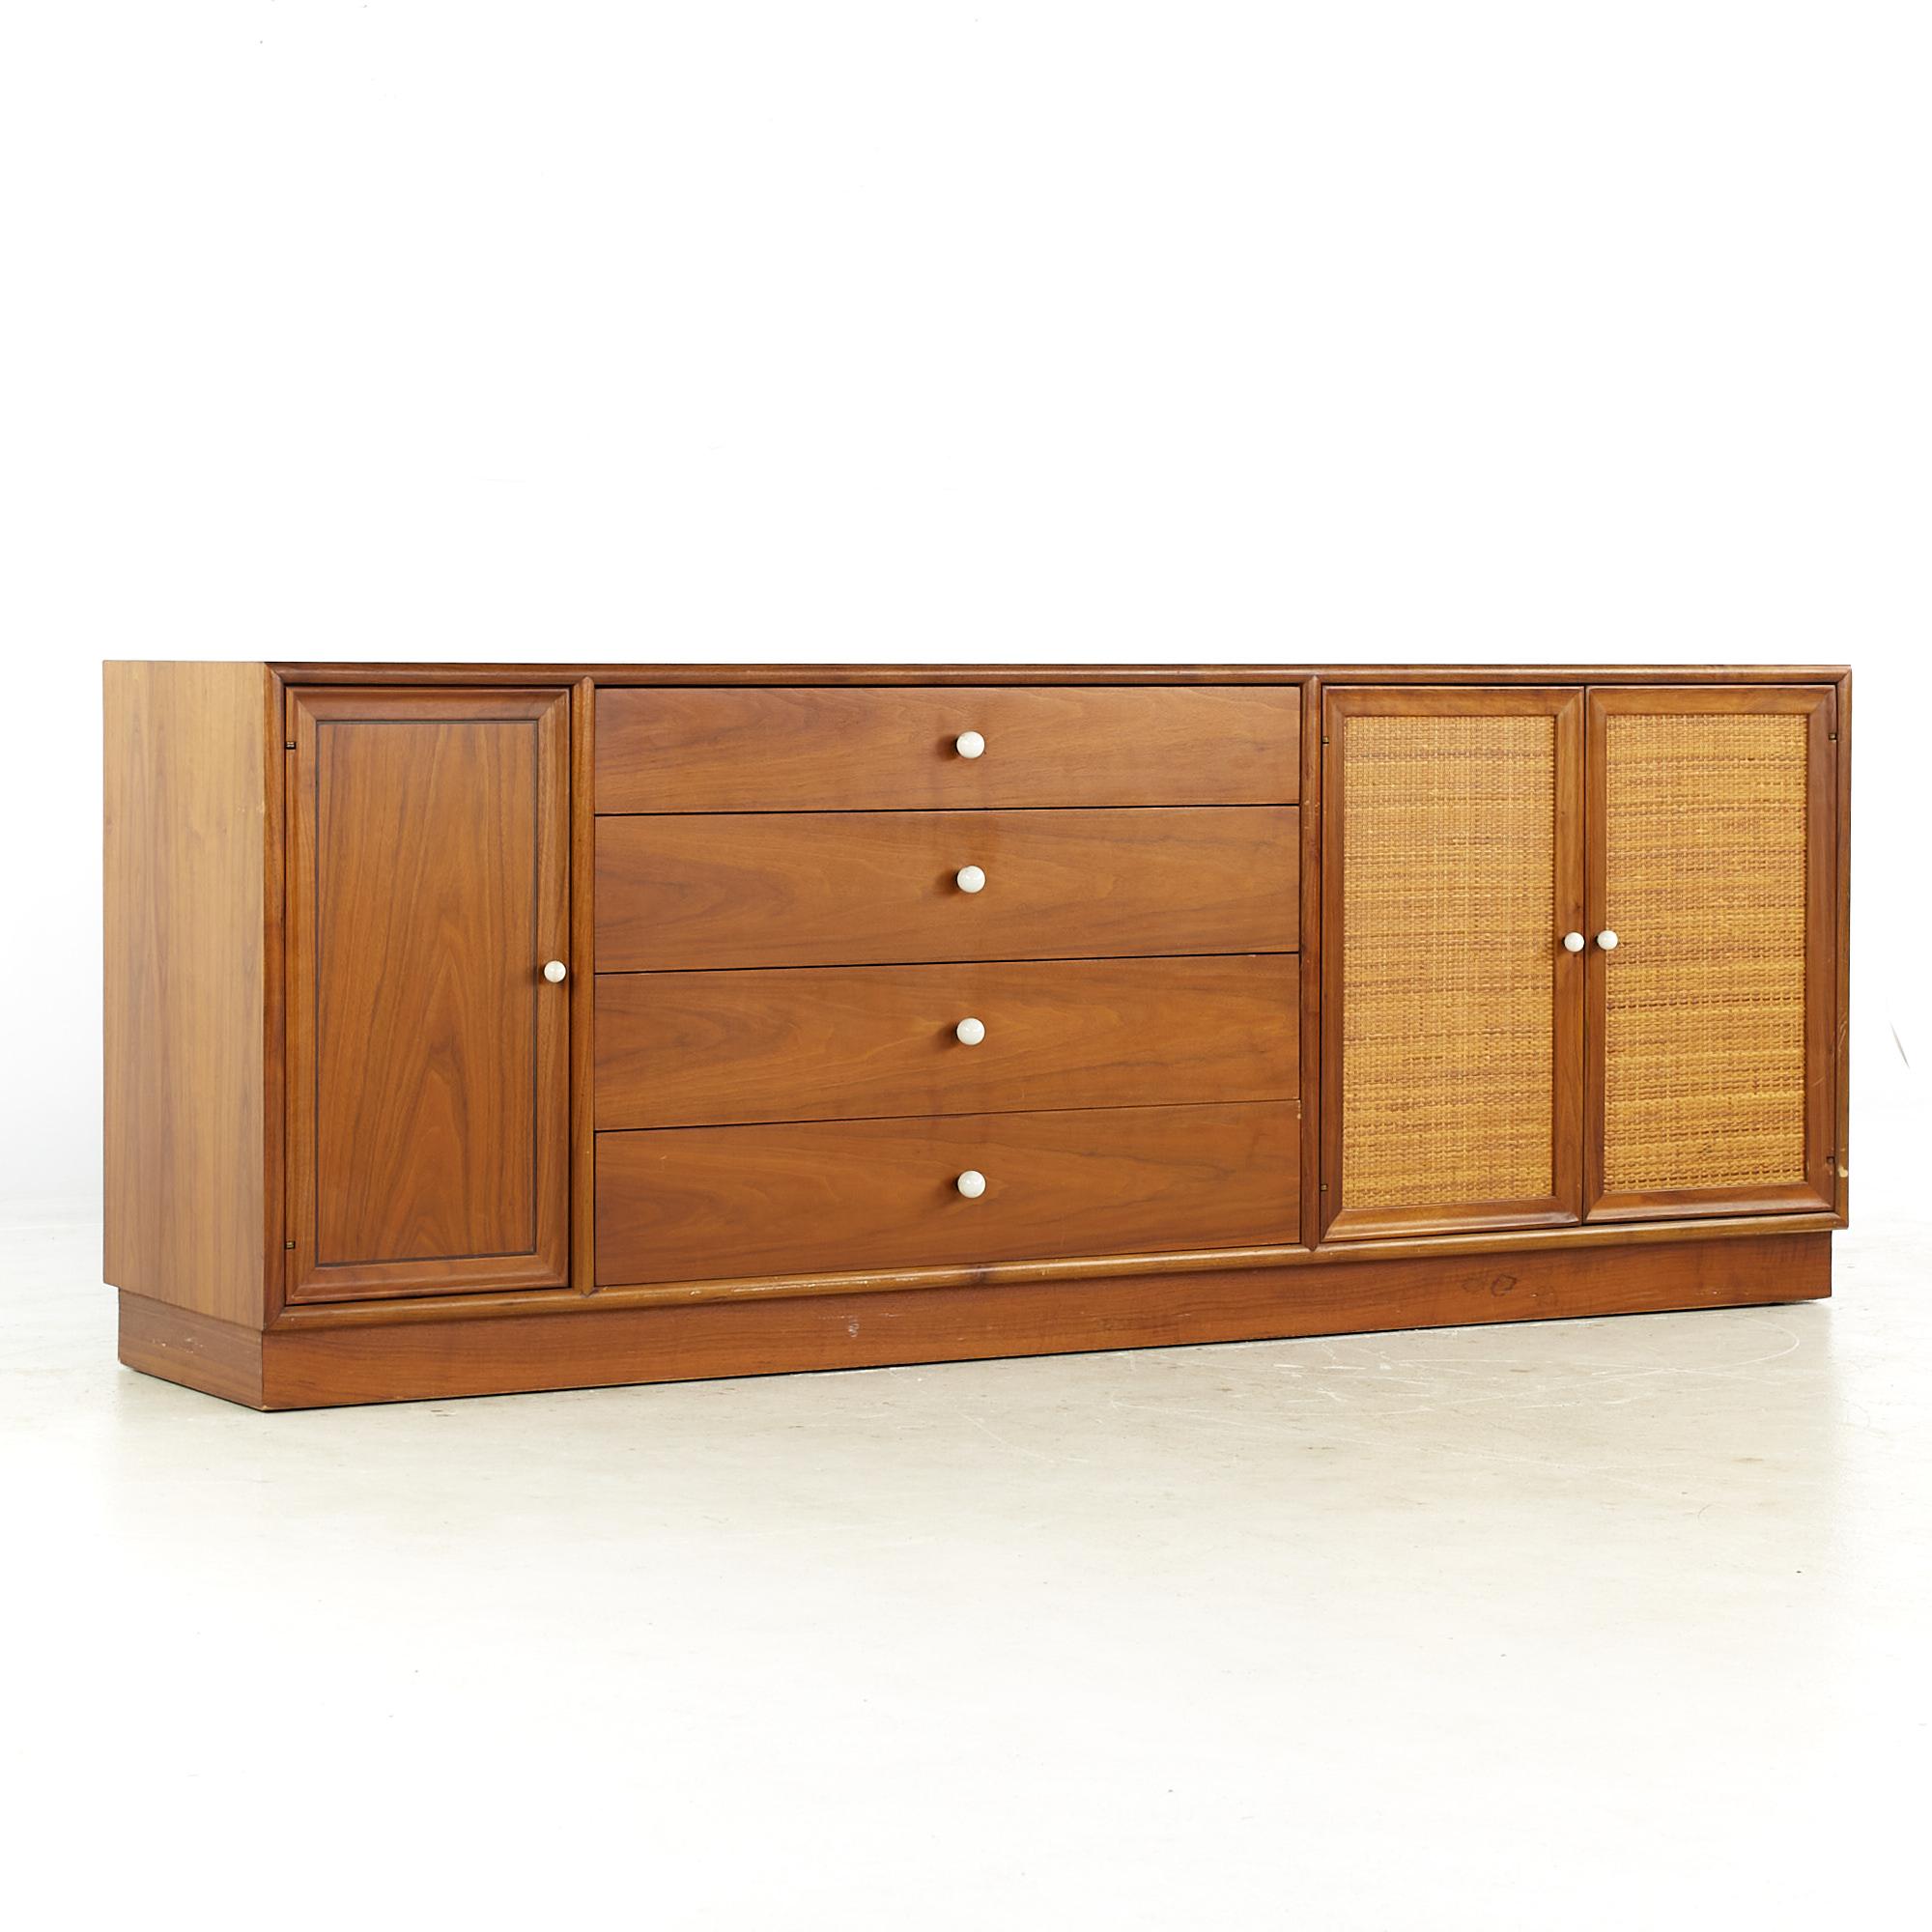 Kipp Stewart for Drexel Mid Century Walnut and Cane Front Buffet and Hutch

The buffet measures: 72 wide x 16.5 deep x 27.25 inches high
The hutch measures: 48.5 wide x 12 deep x 40 inches high
The combined height of the buffet and hutch is